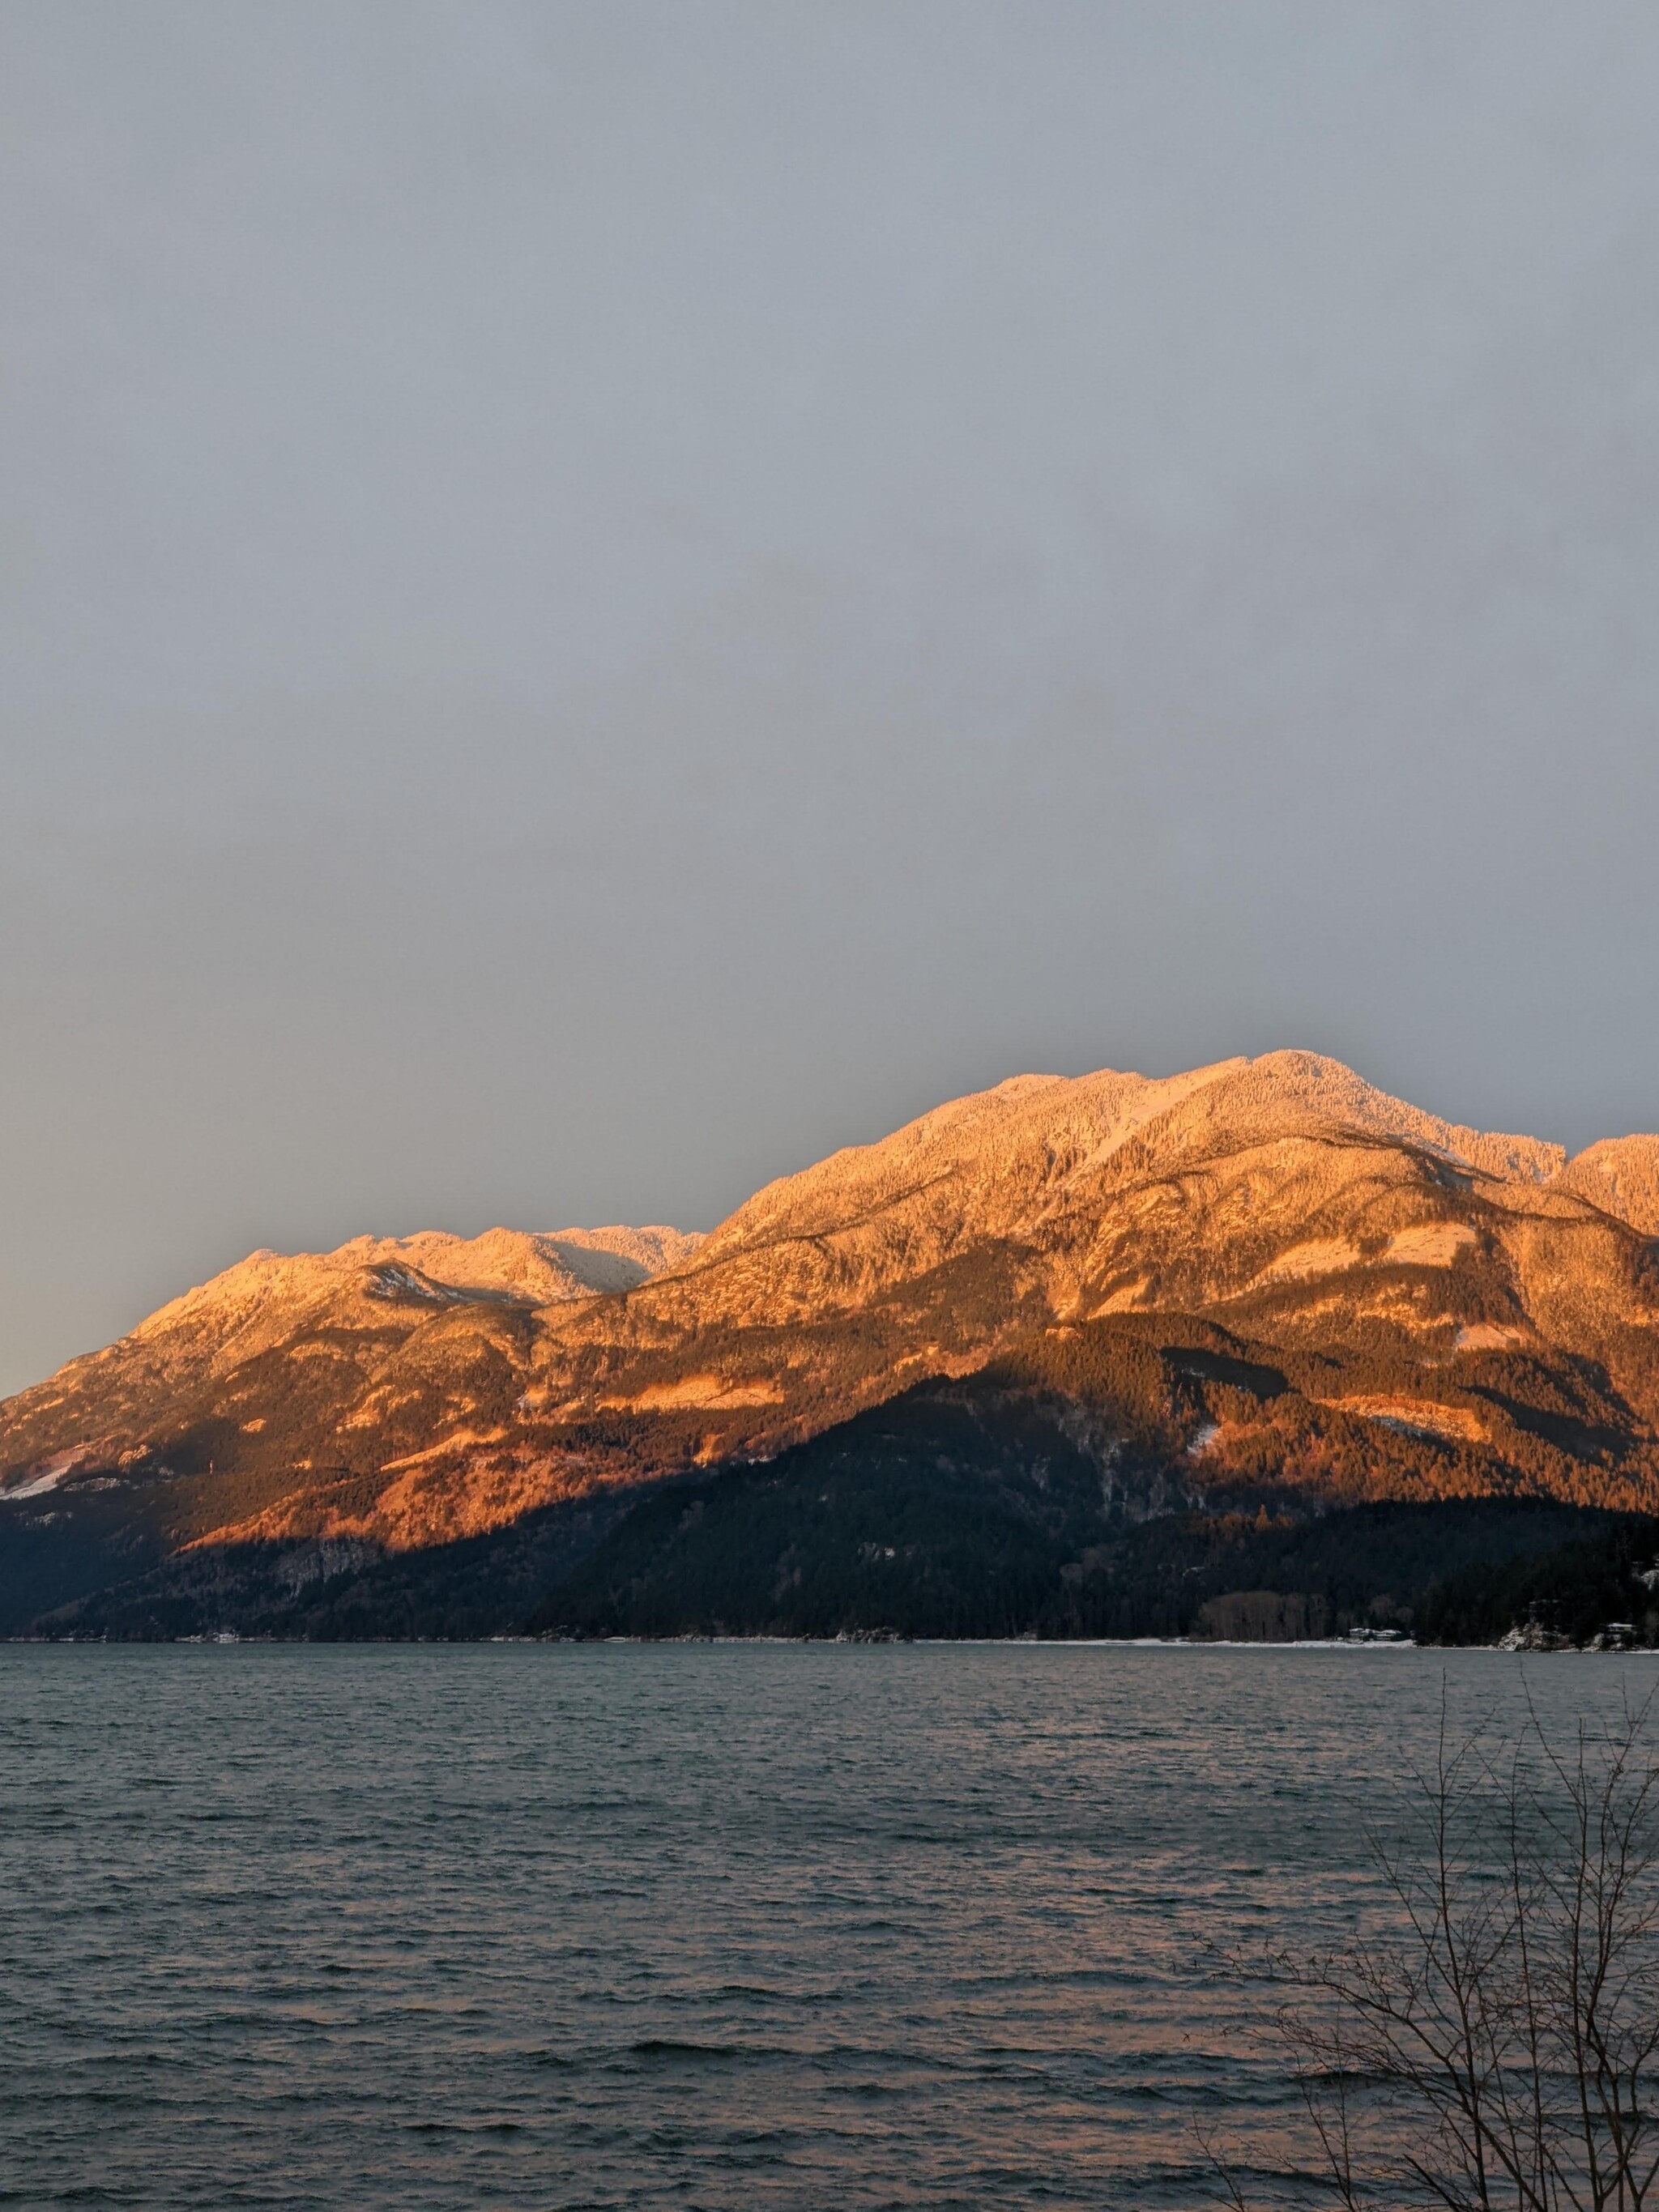 Sunset in the mountains of Canada - My, The mountains, Sunset, Winter, Canada, Lake, Vancouver, Nature